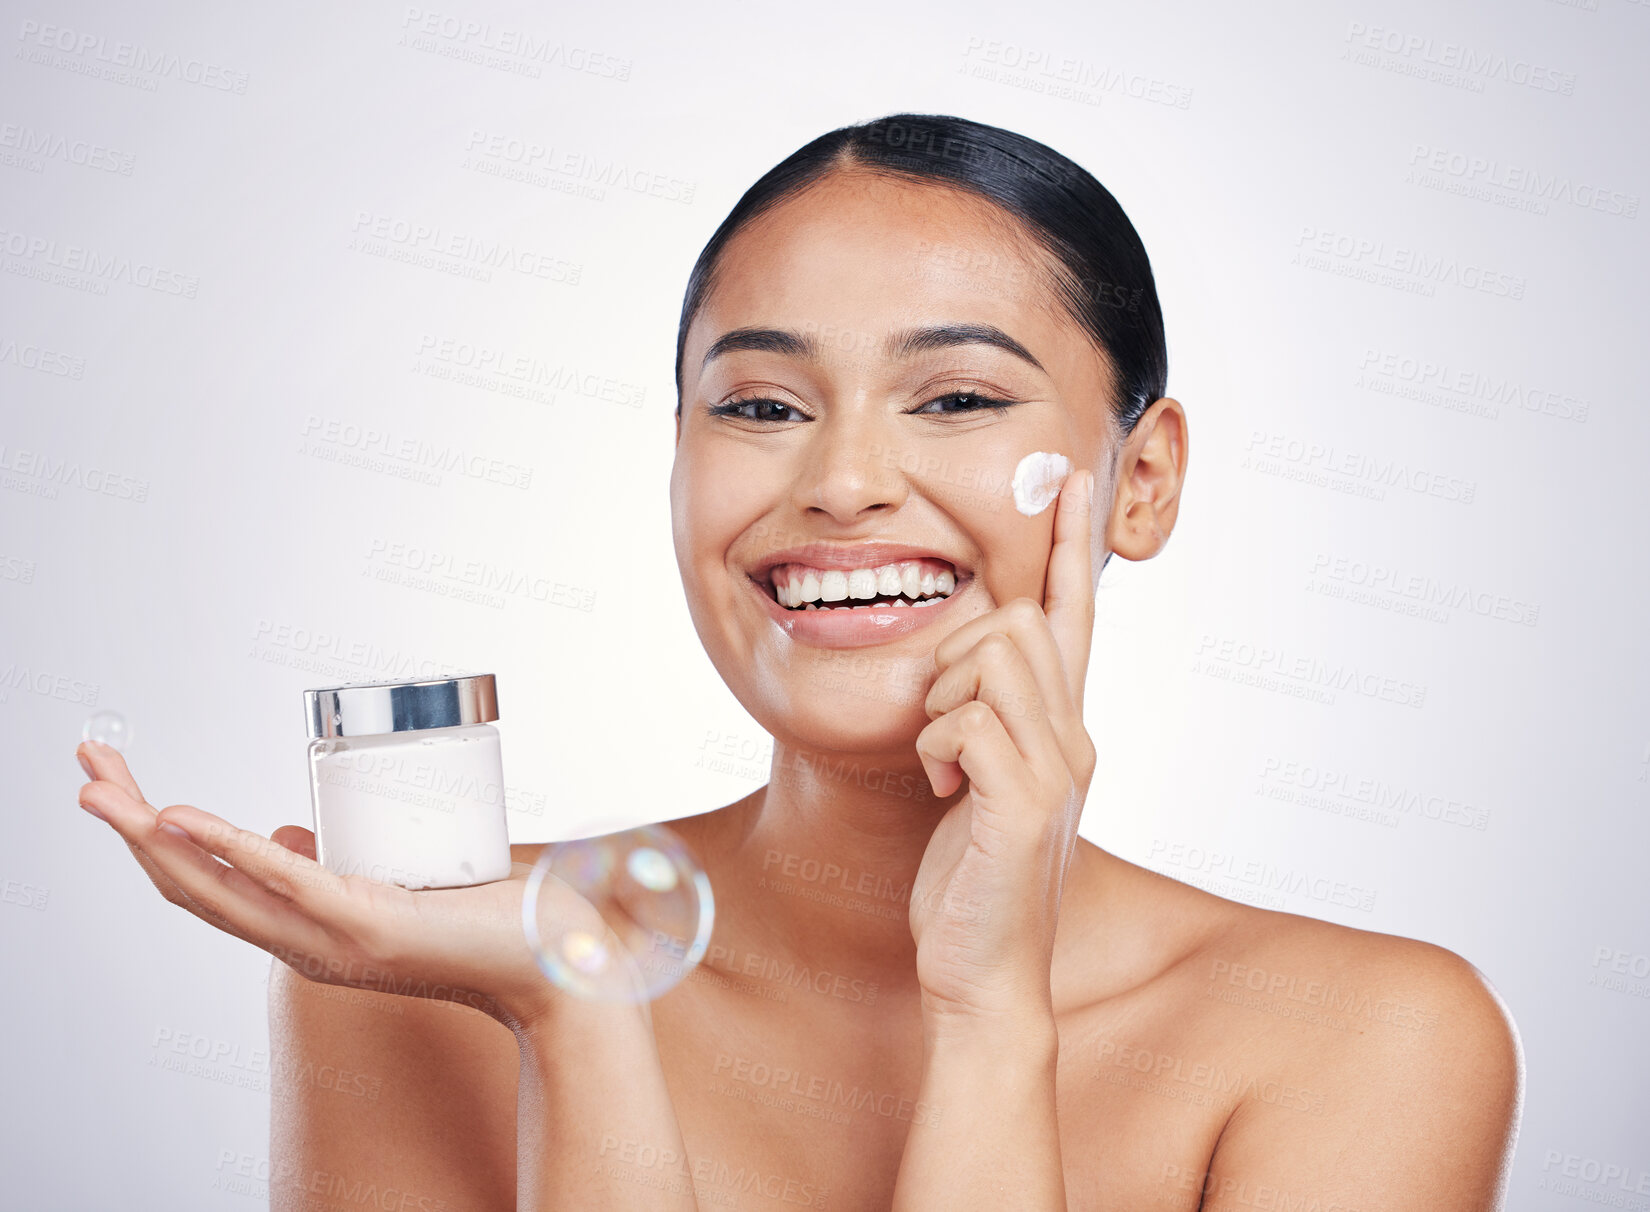 Buy stock photo Happy woman, portrait smile and cream in skincare, moisturizer or cosmetics against a white studio background. Female person or model smiling for product, lotion or facial treatment on mockup space